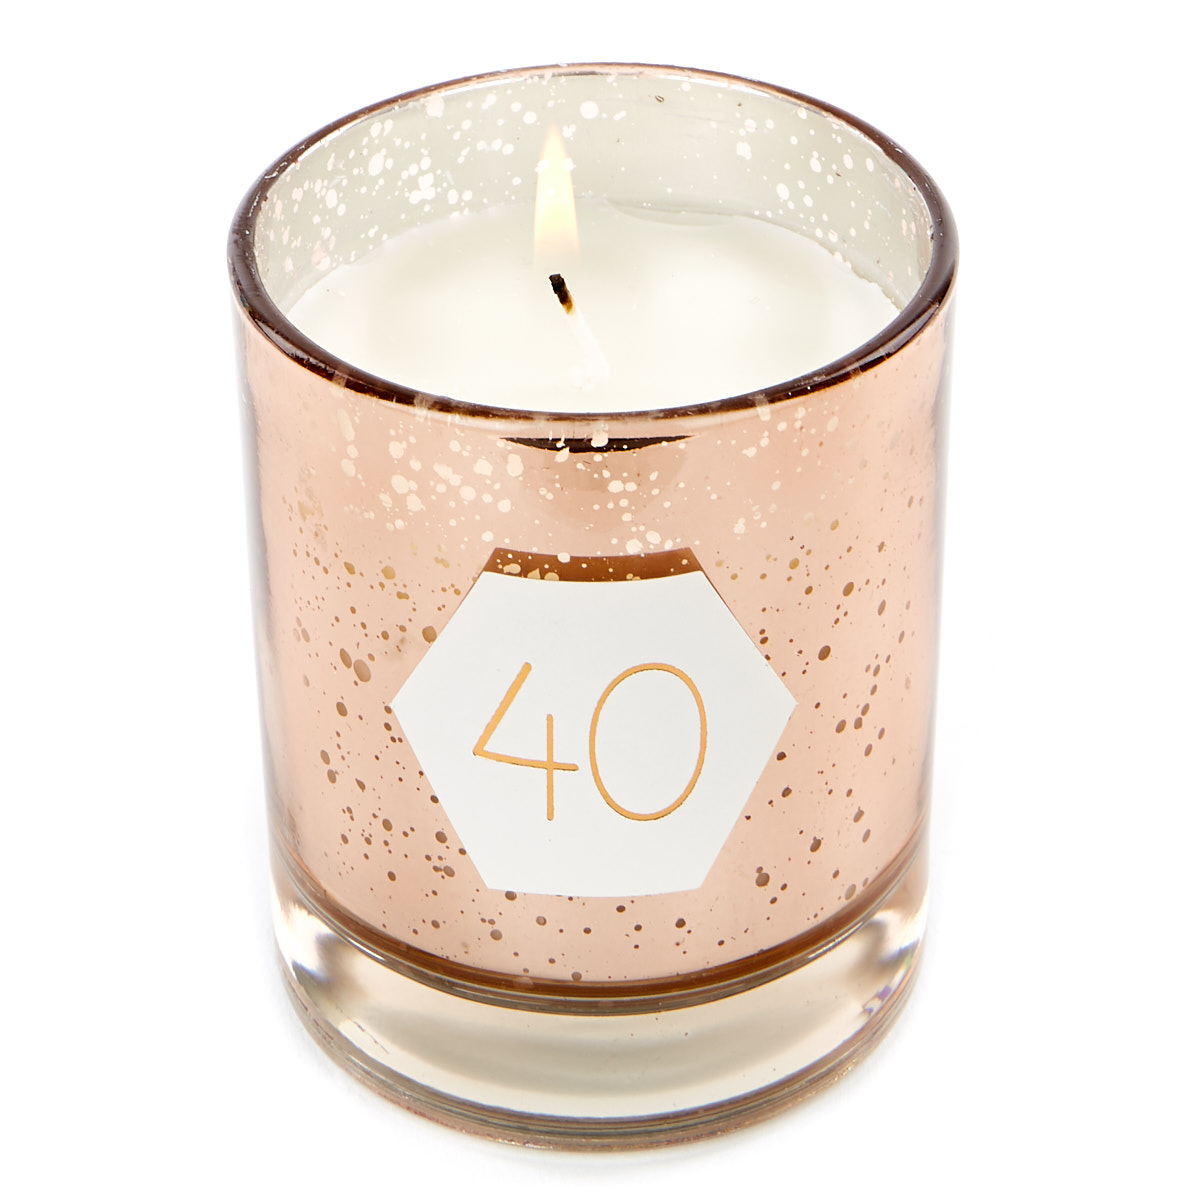 Rose Gold Vanilla Scented 40th Birthday Candle